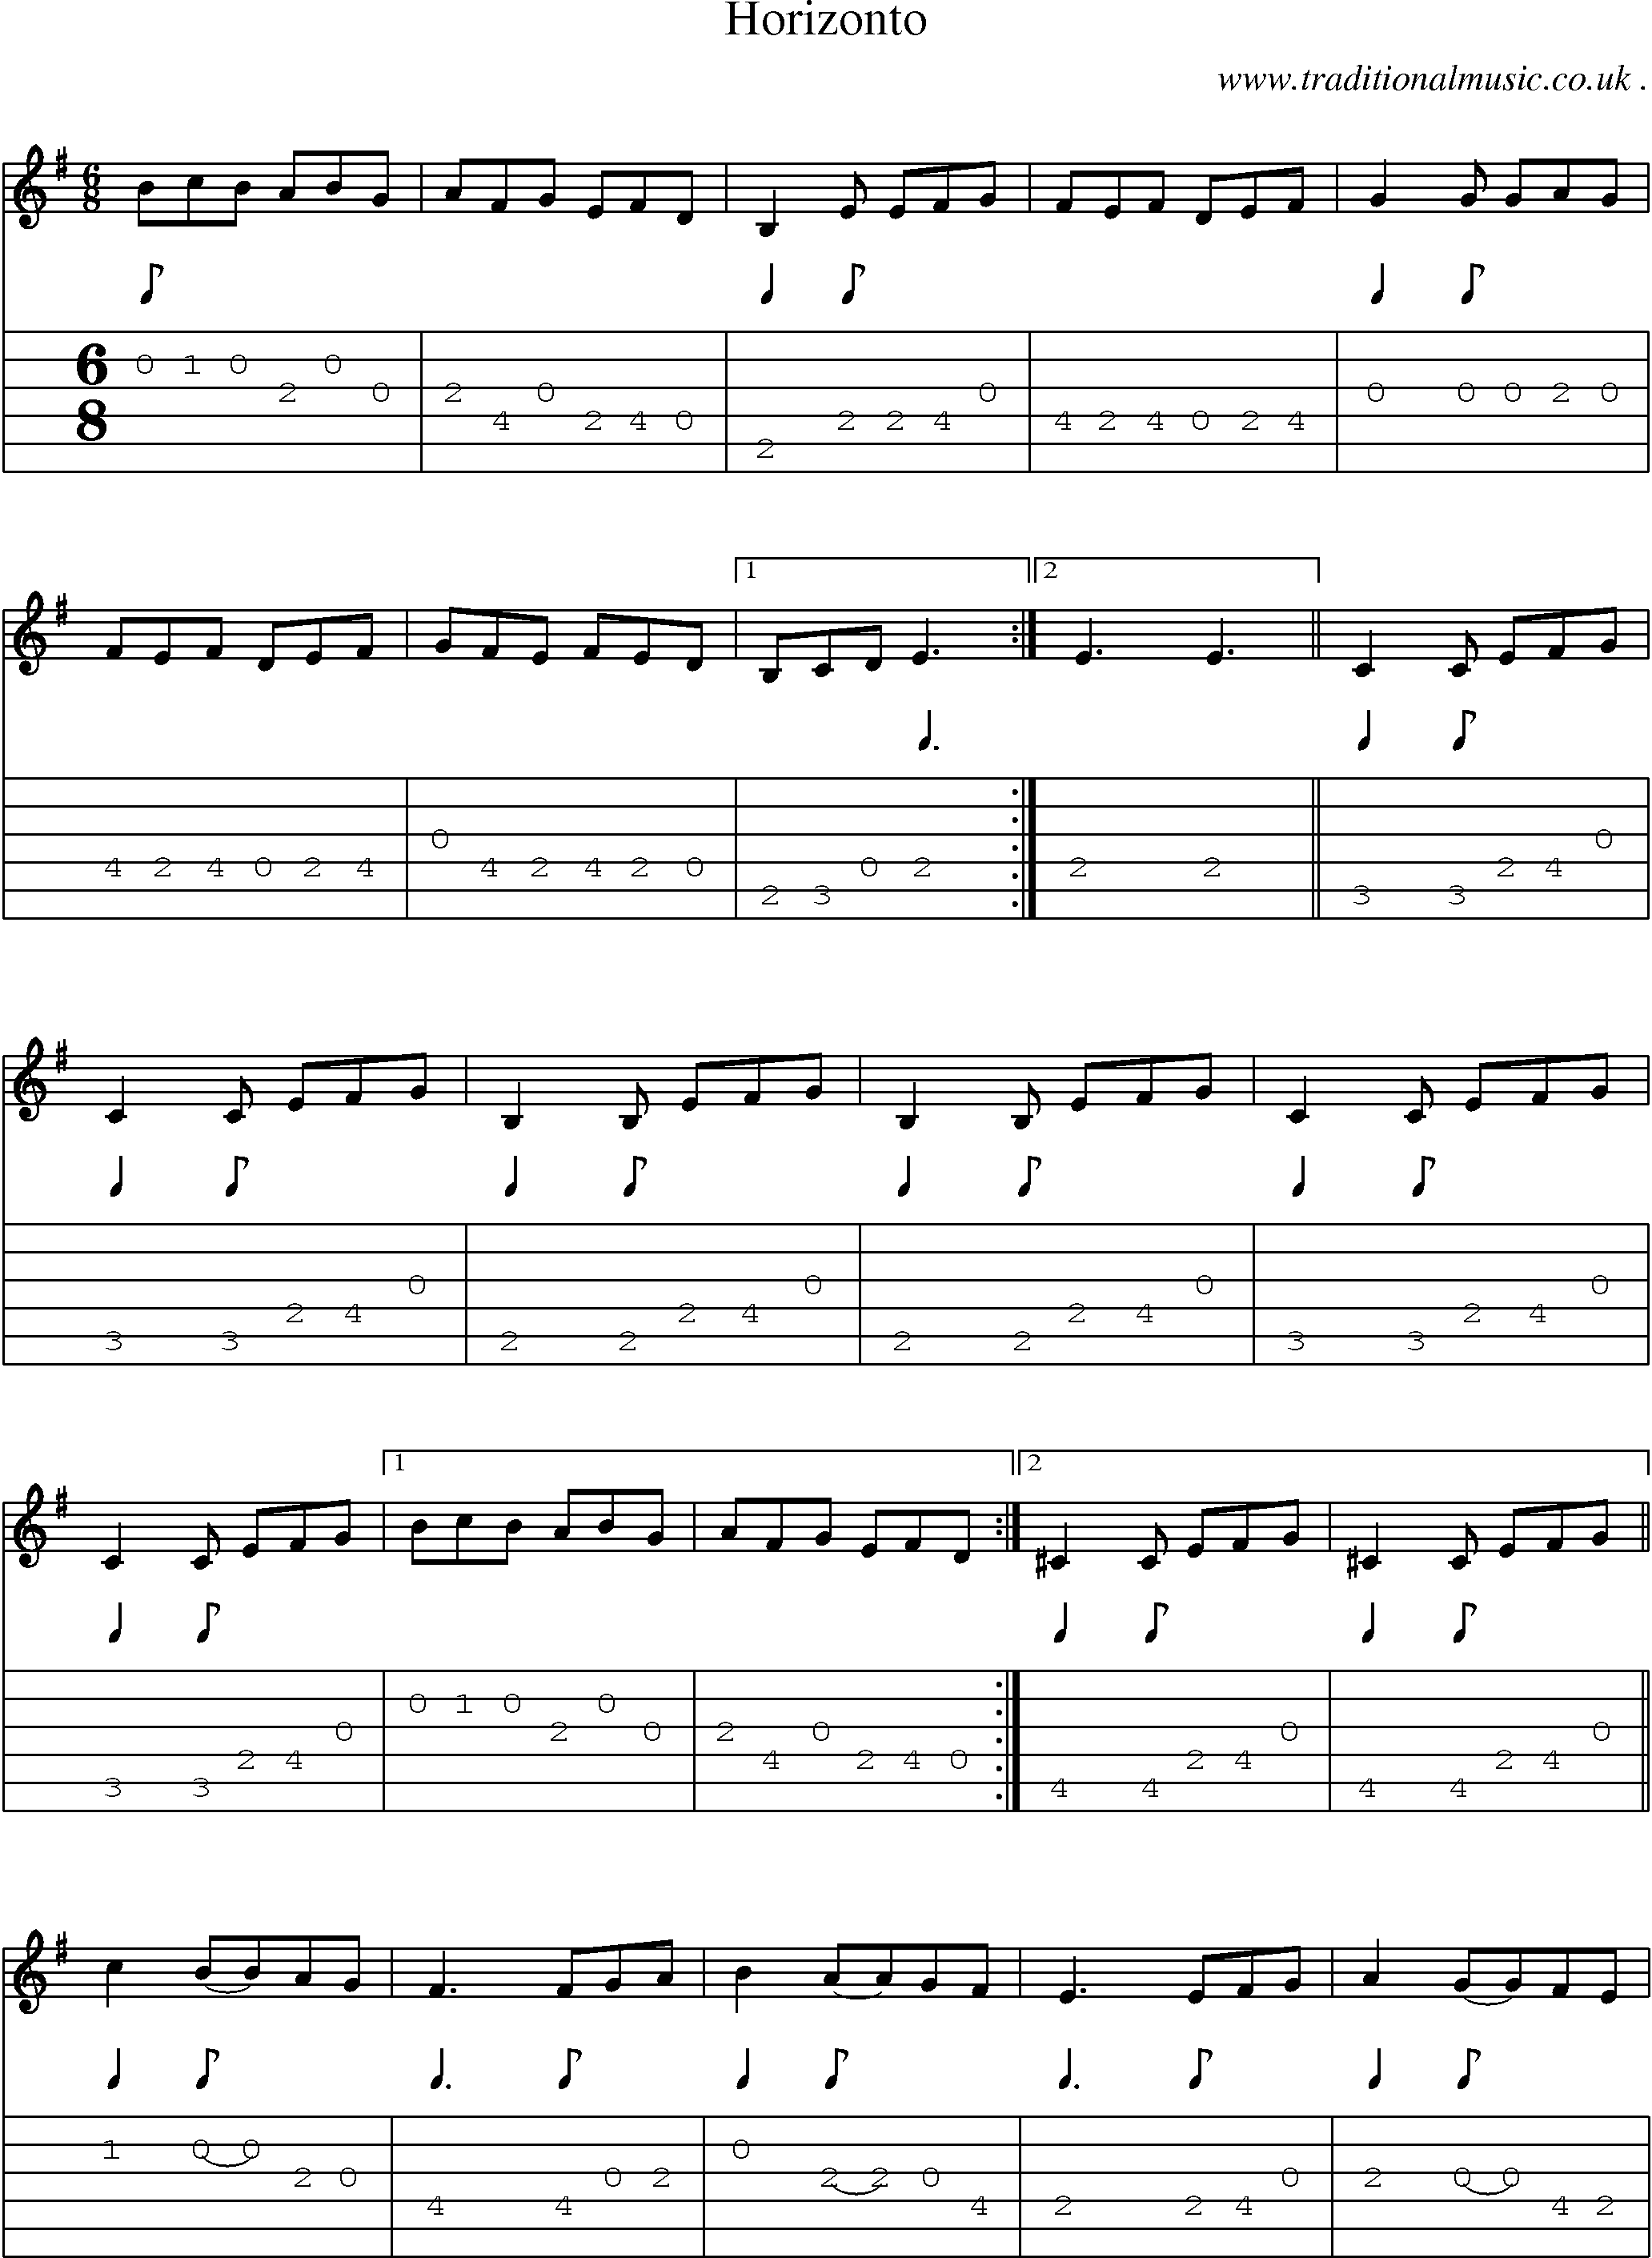 Sheet-Music and Guitar Tabs for Horizonto